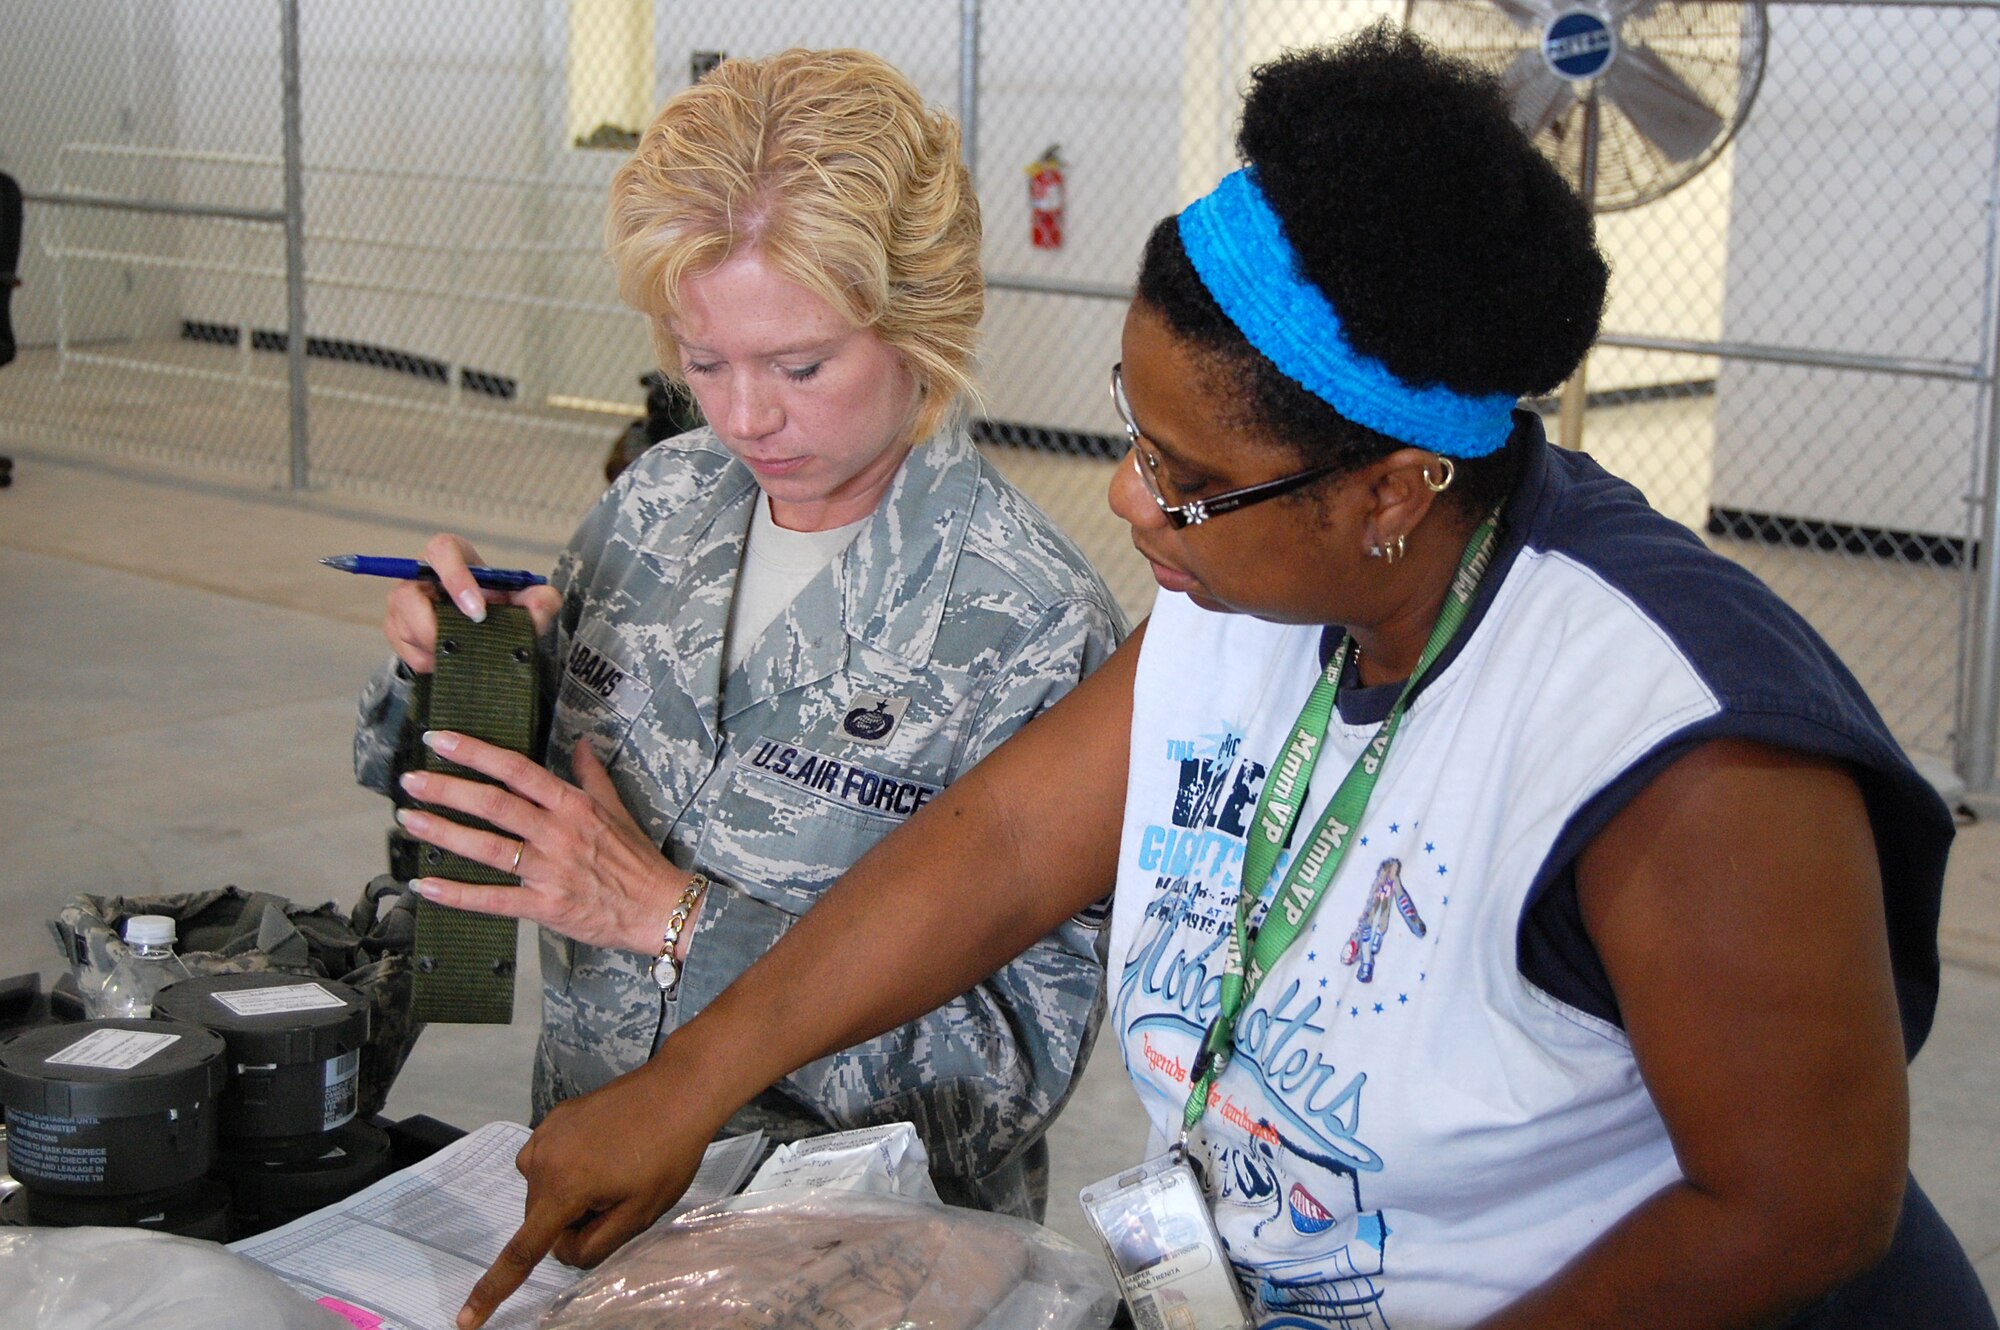 Wanda Harper, 902nd Logistics Readiness Squadron, assists Tech. Sgt. Dawn Adams, Air Force Personnel Center, in inventorying her equipment at the 902nd Logistics Readiness Squadron Deployment Processing Center on Randolph Air Force Base Aug. 10. During exercise Joint Base San Antonio 10-08, more than 200 Airmen from different agencies on Randolph AFB participated in the two-day deployment exercise. (U.S. Air Force photo/Master Sgt. Paul Kilgallon)